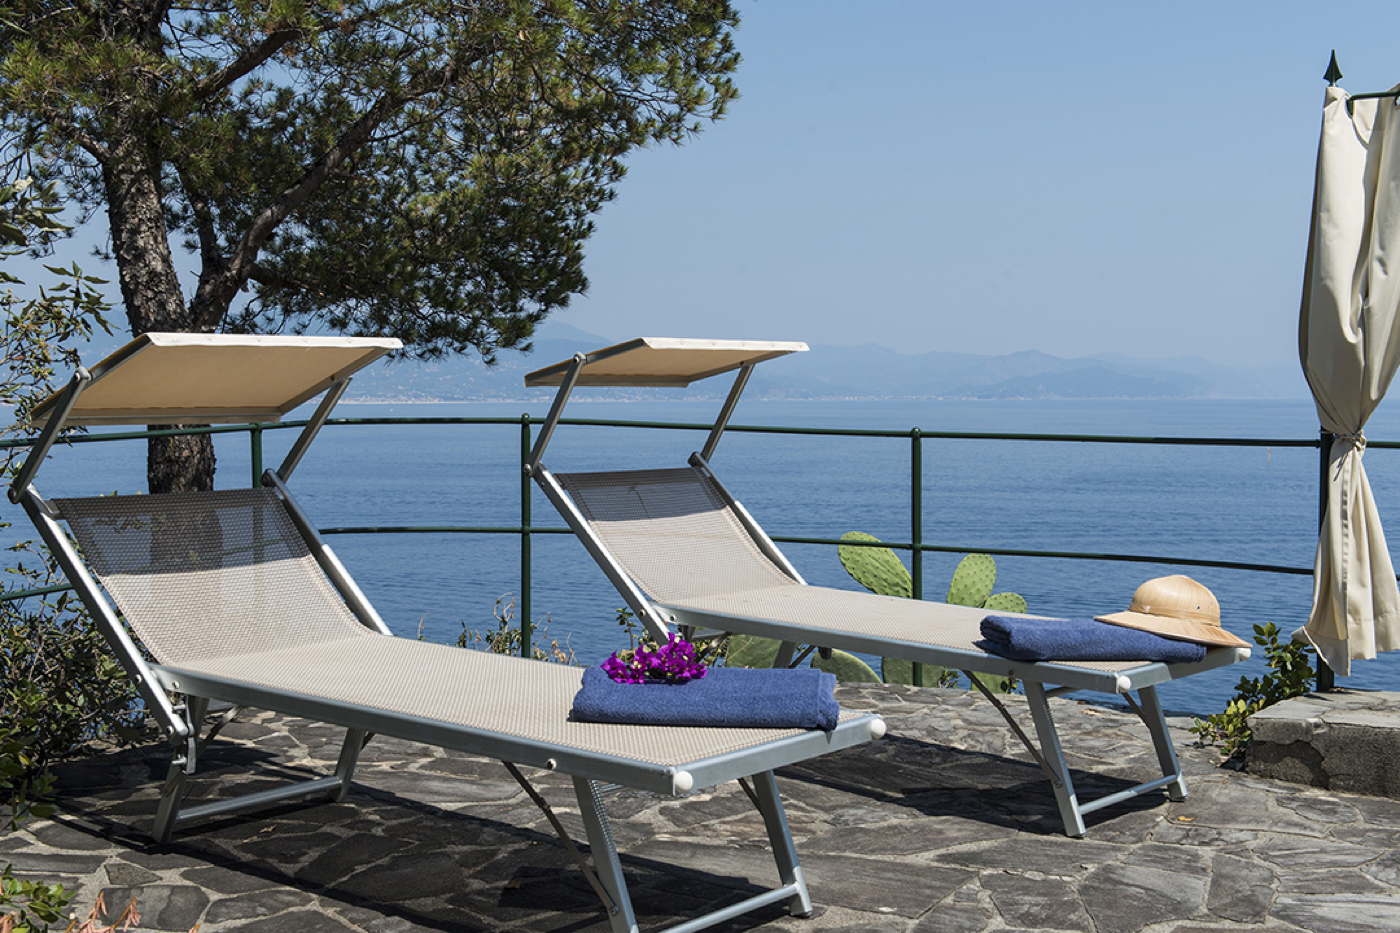 Luxury holiday villa with private sea access and pool in Liguria Italy